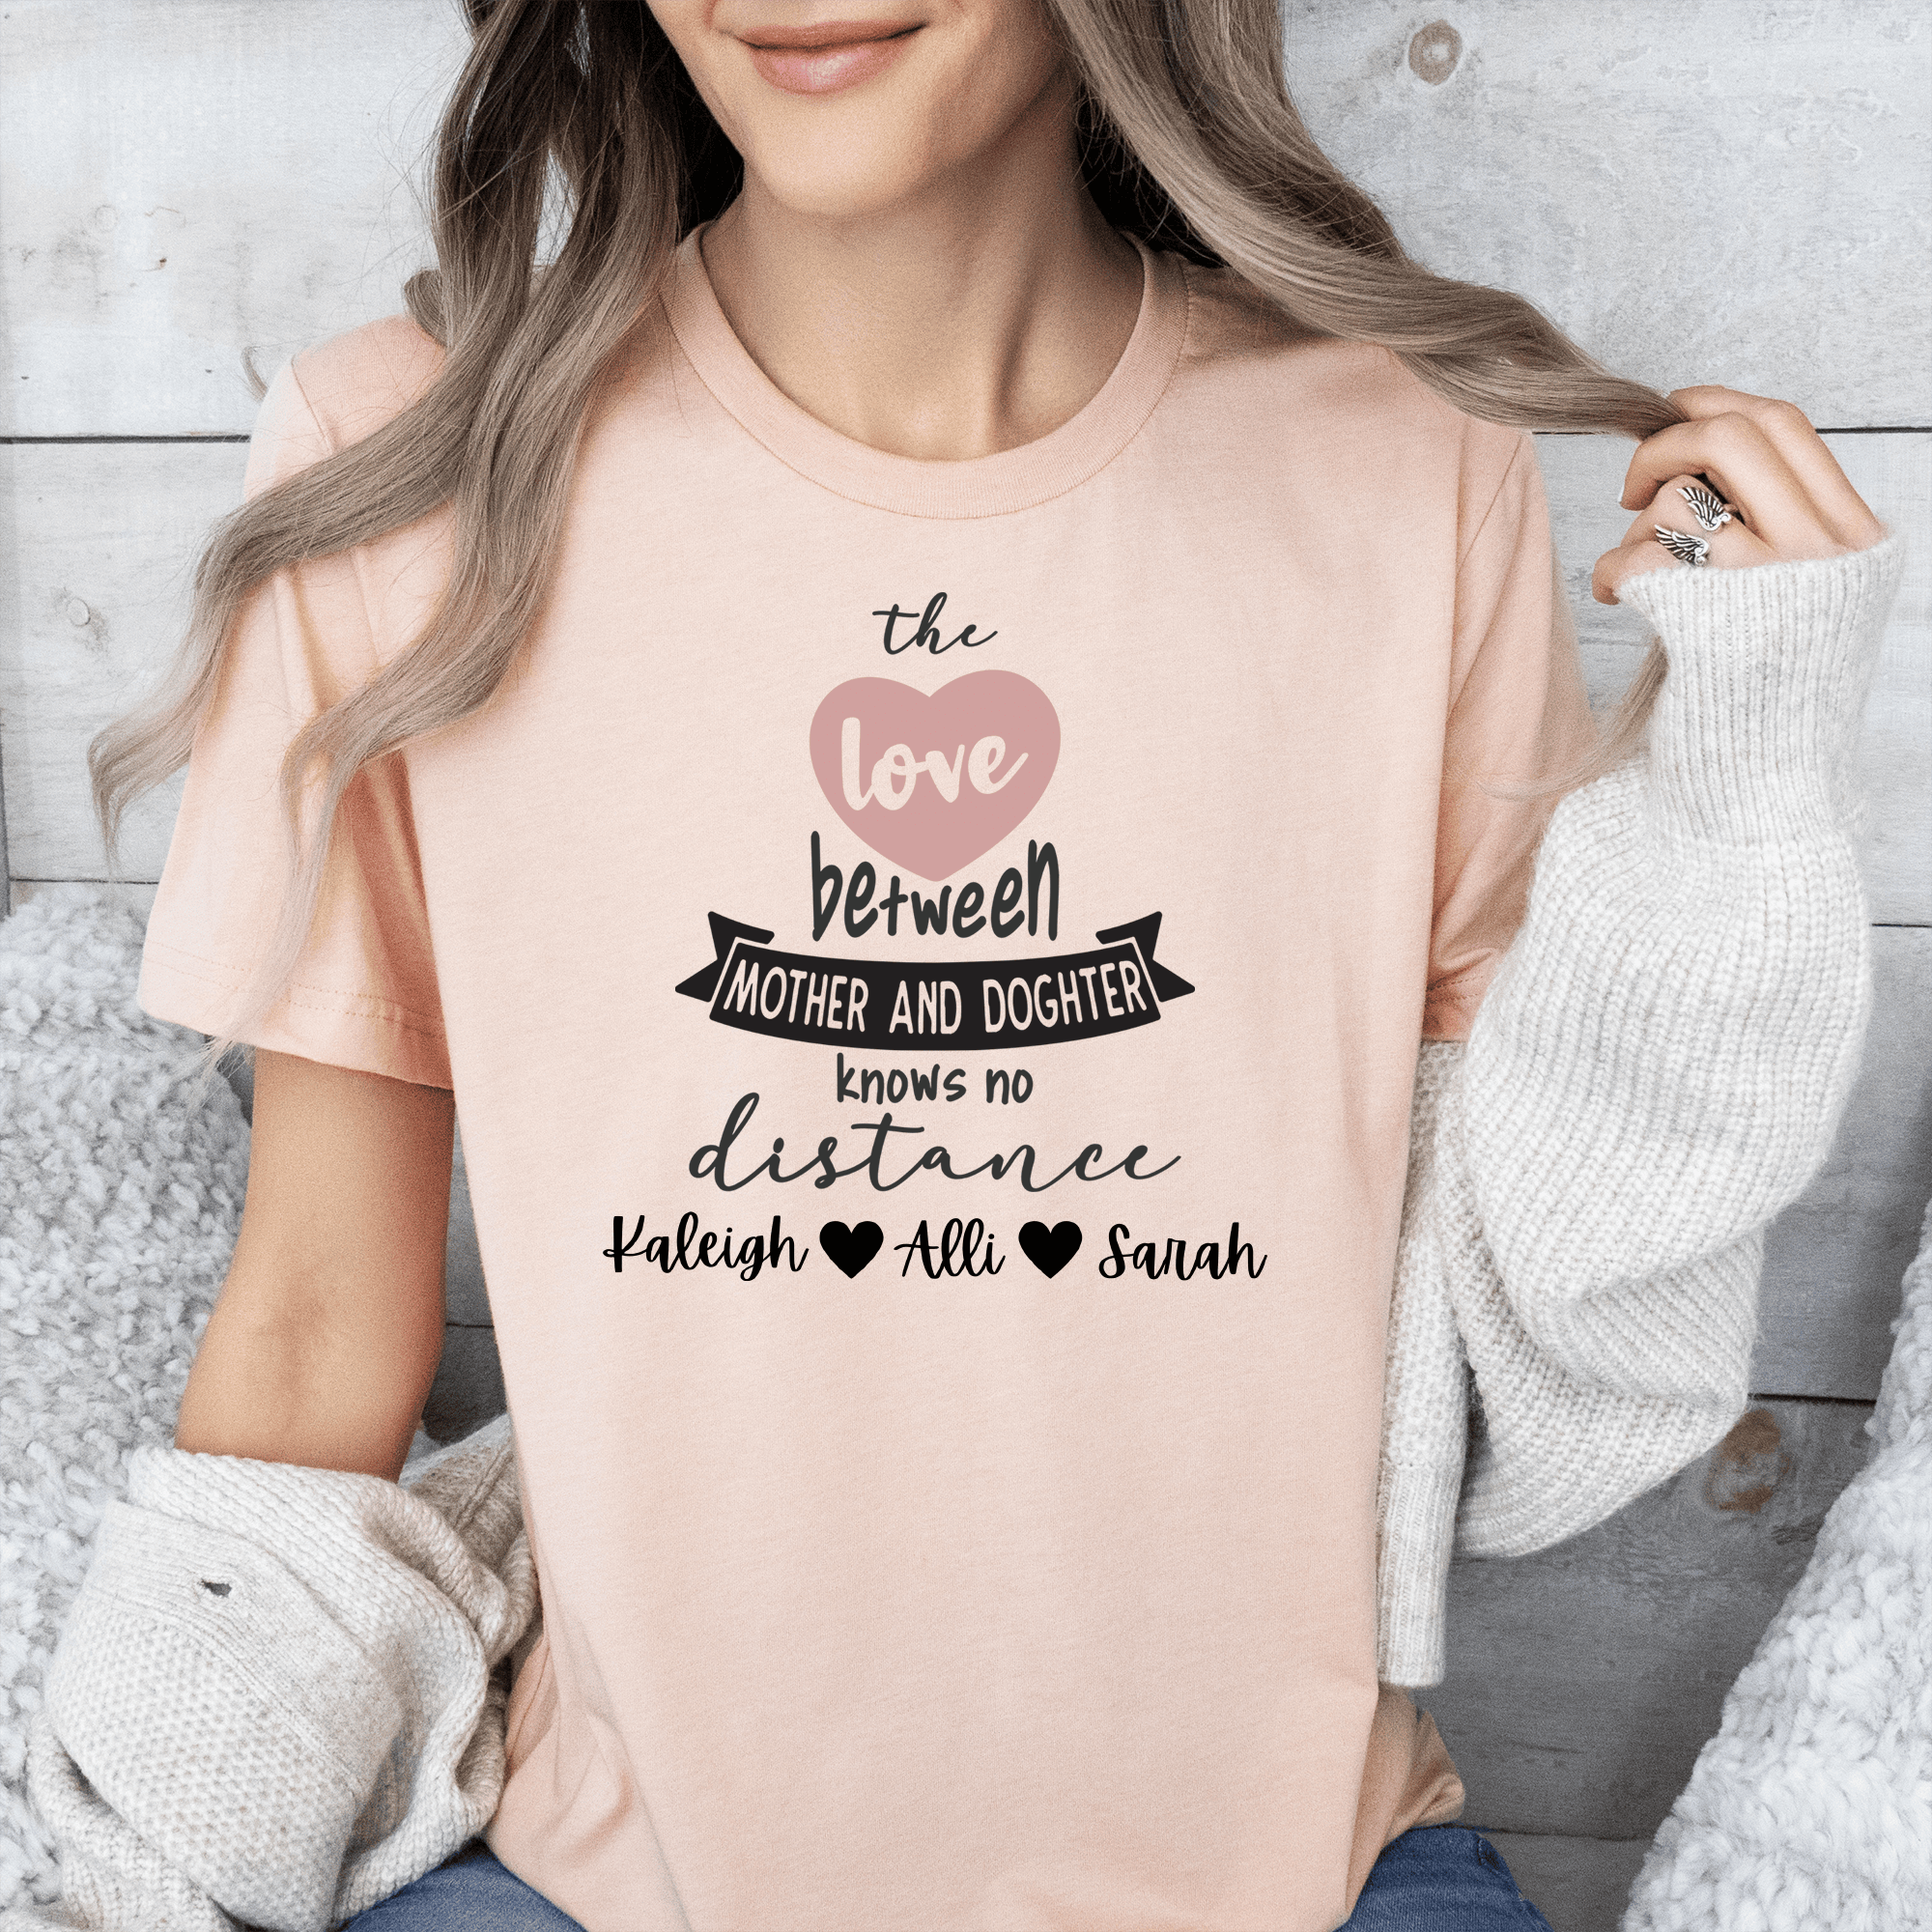 Womens Heather Peach T Shirt with Mothers-And-Daughters design